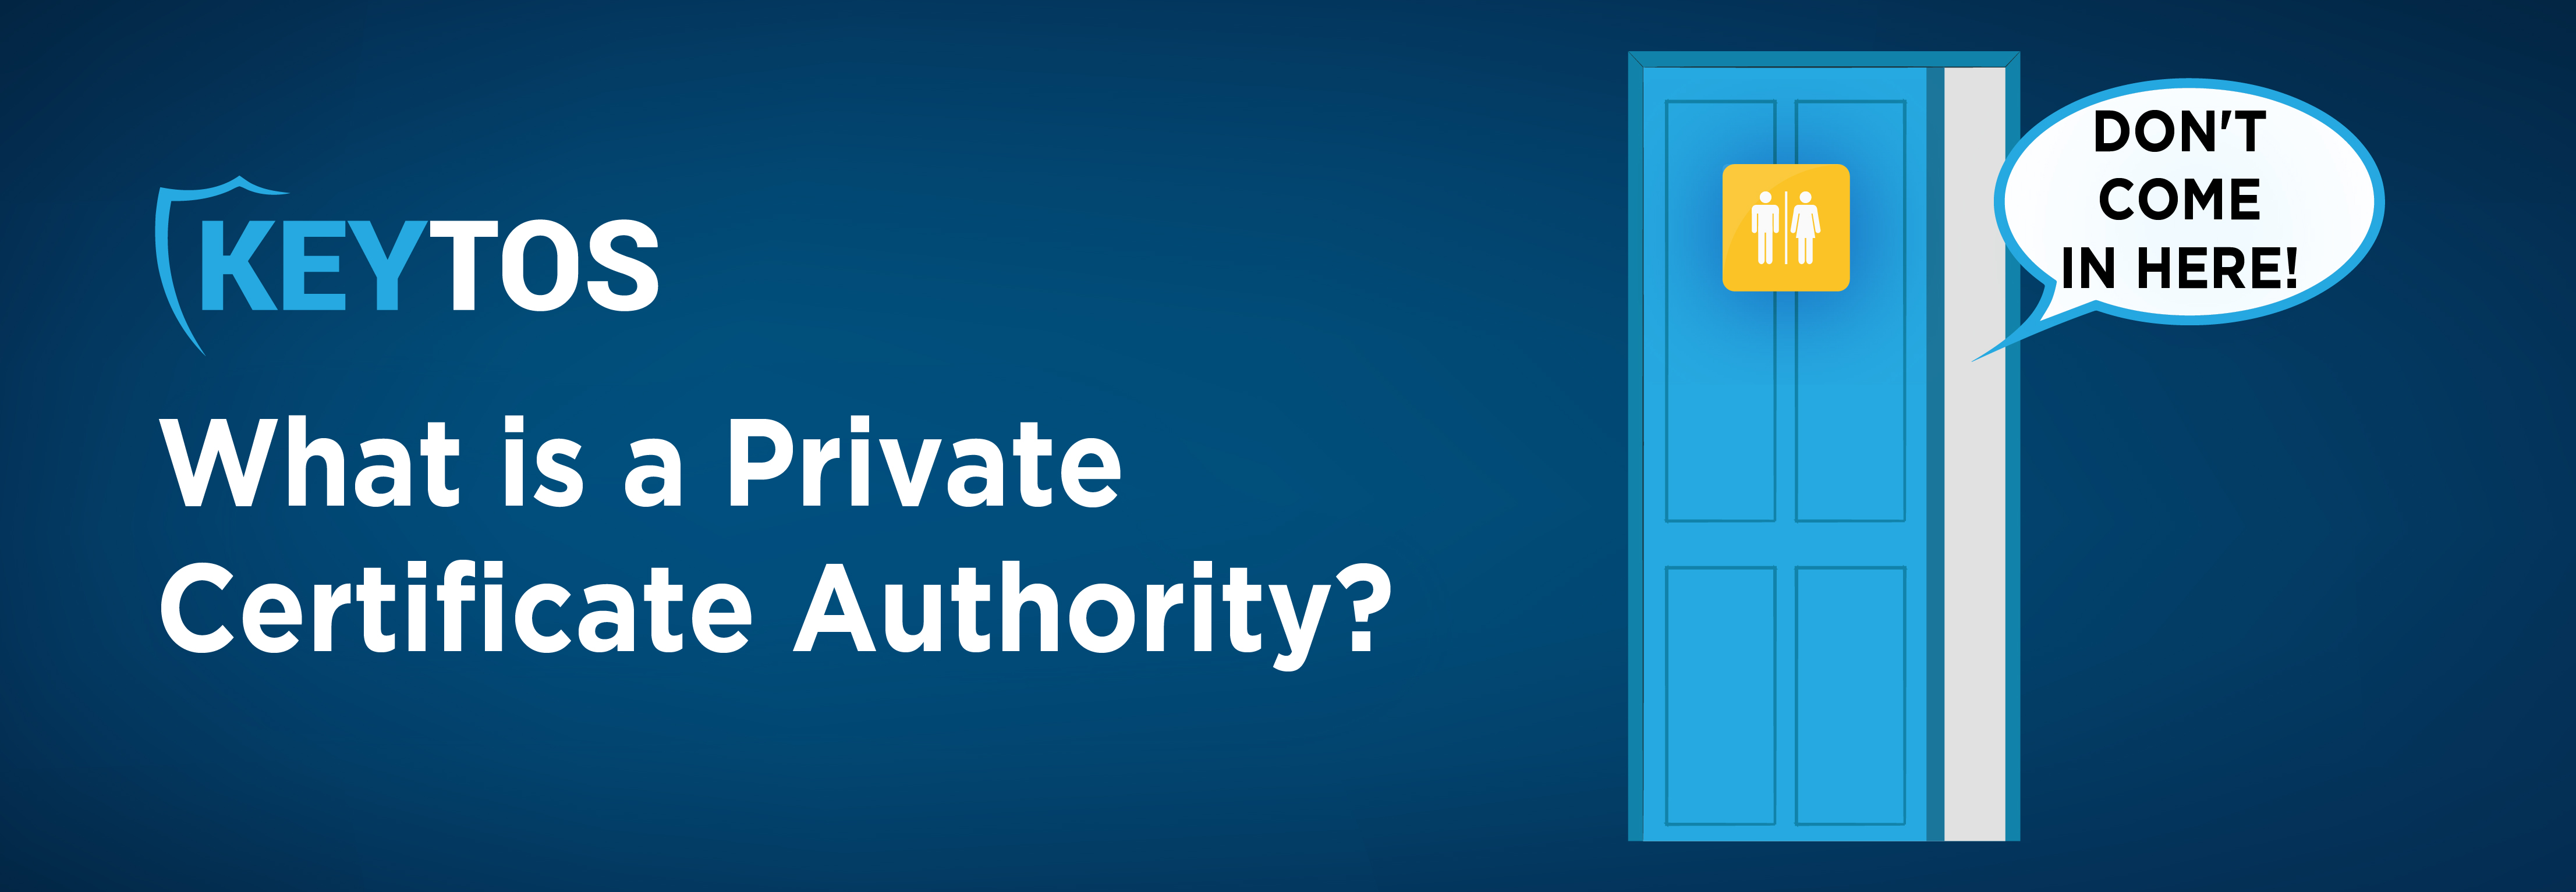 What is a Private Certificate Authority?